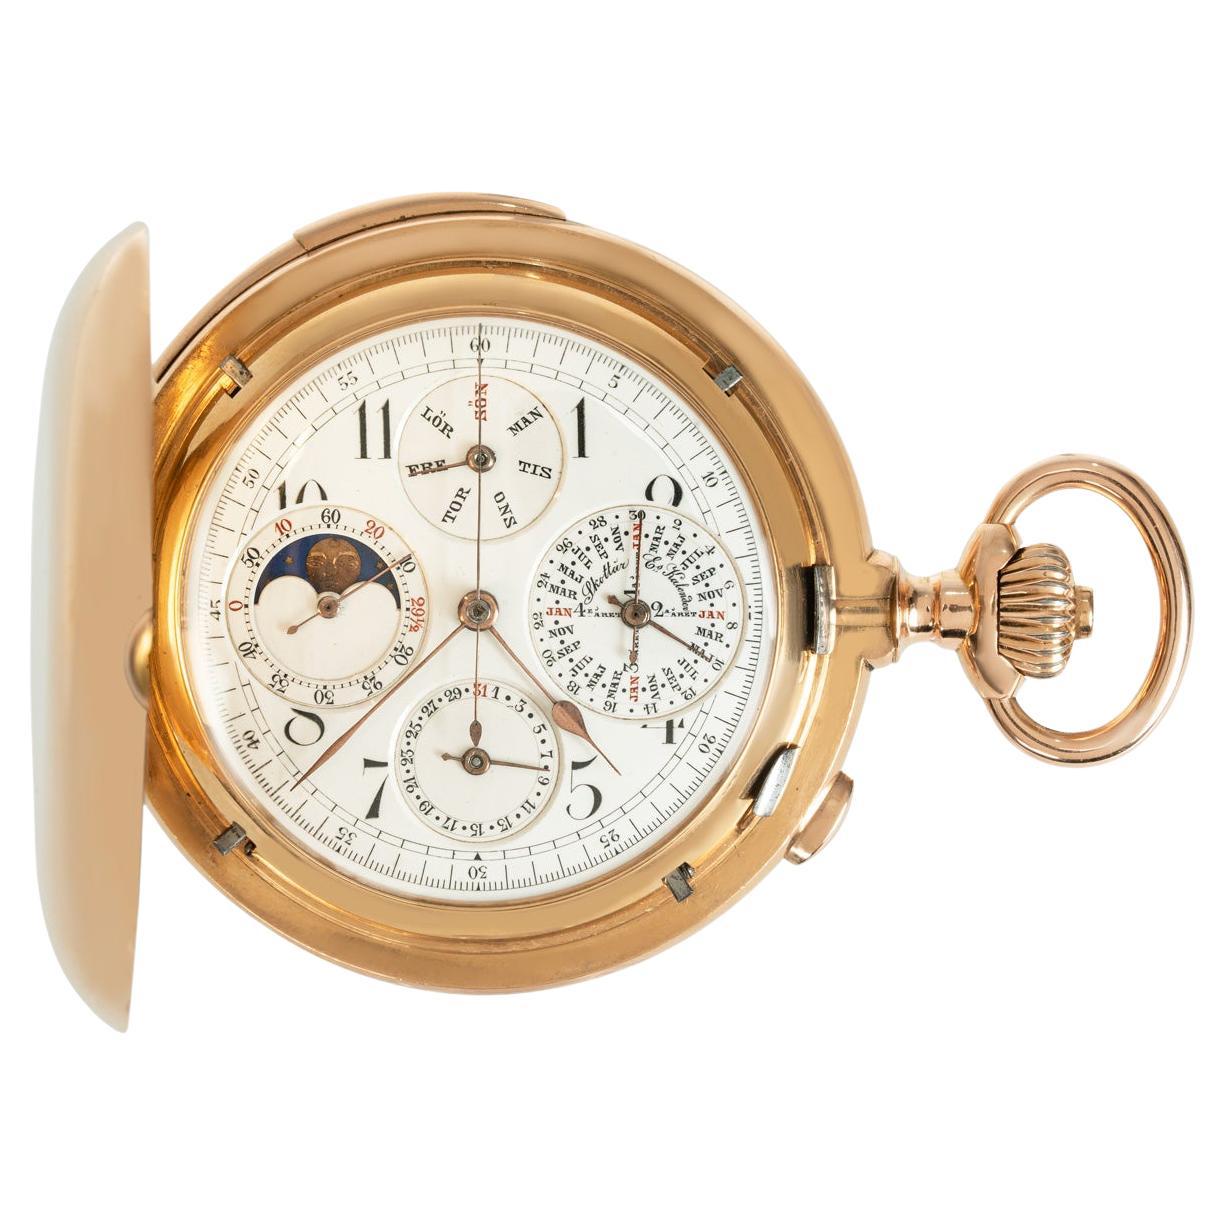 A Swiss Perpetual Minute Repeater Chronograph Full Hunter Pocket Watch C1900